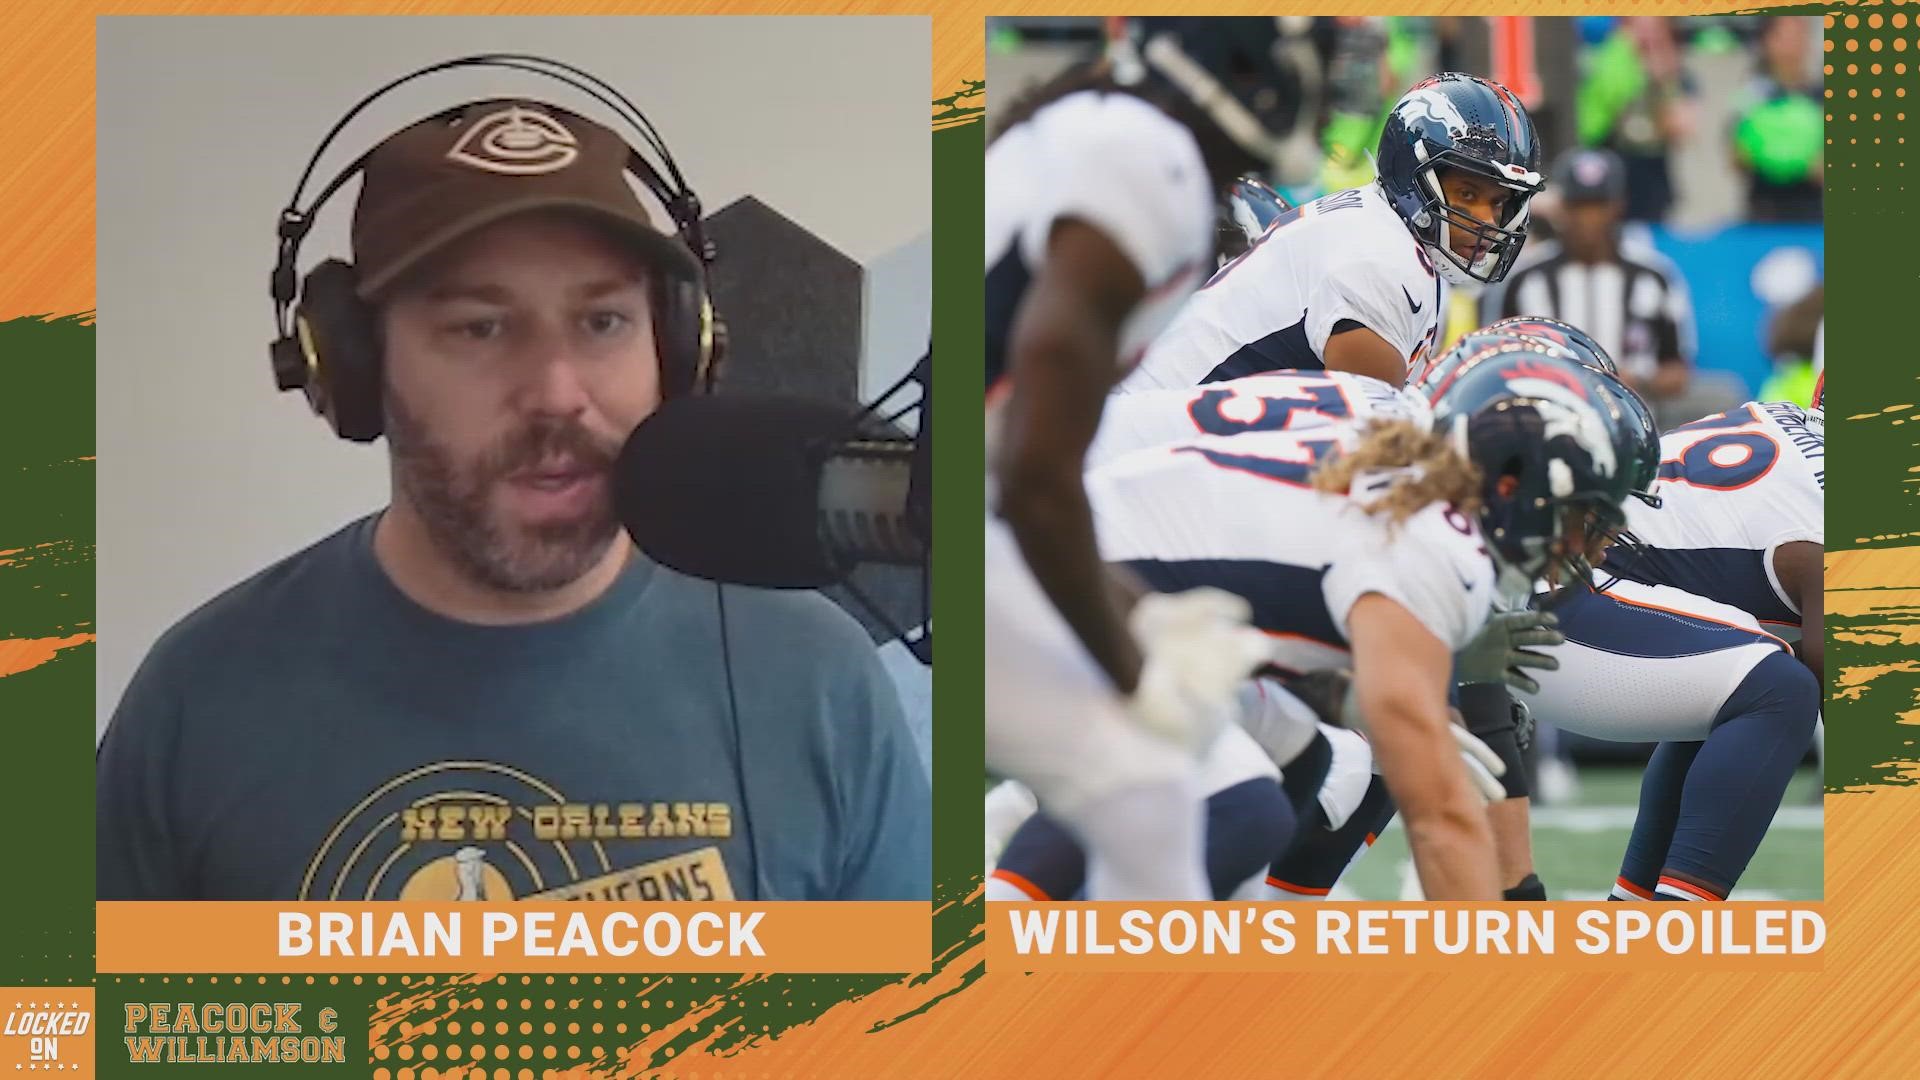 Brian Peacock and Matt Williamson discuss Monday Night Football and the Broncos win over the Seahawks. The duo also answer your NFL questions.